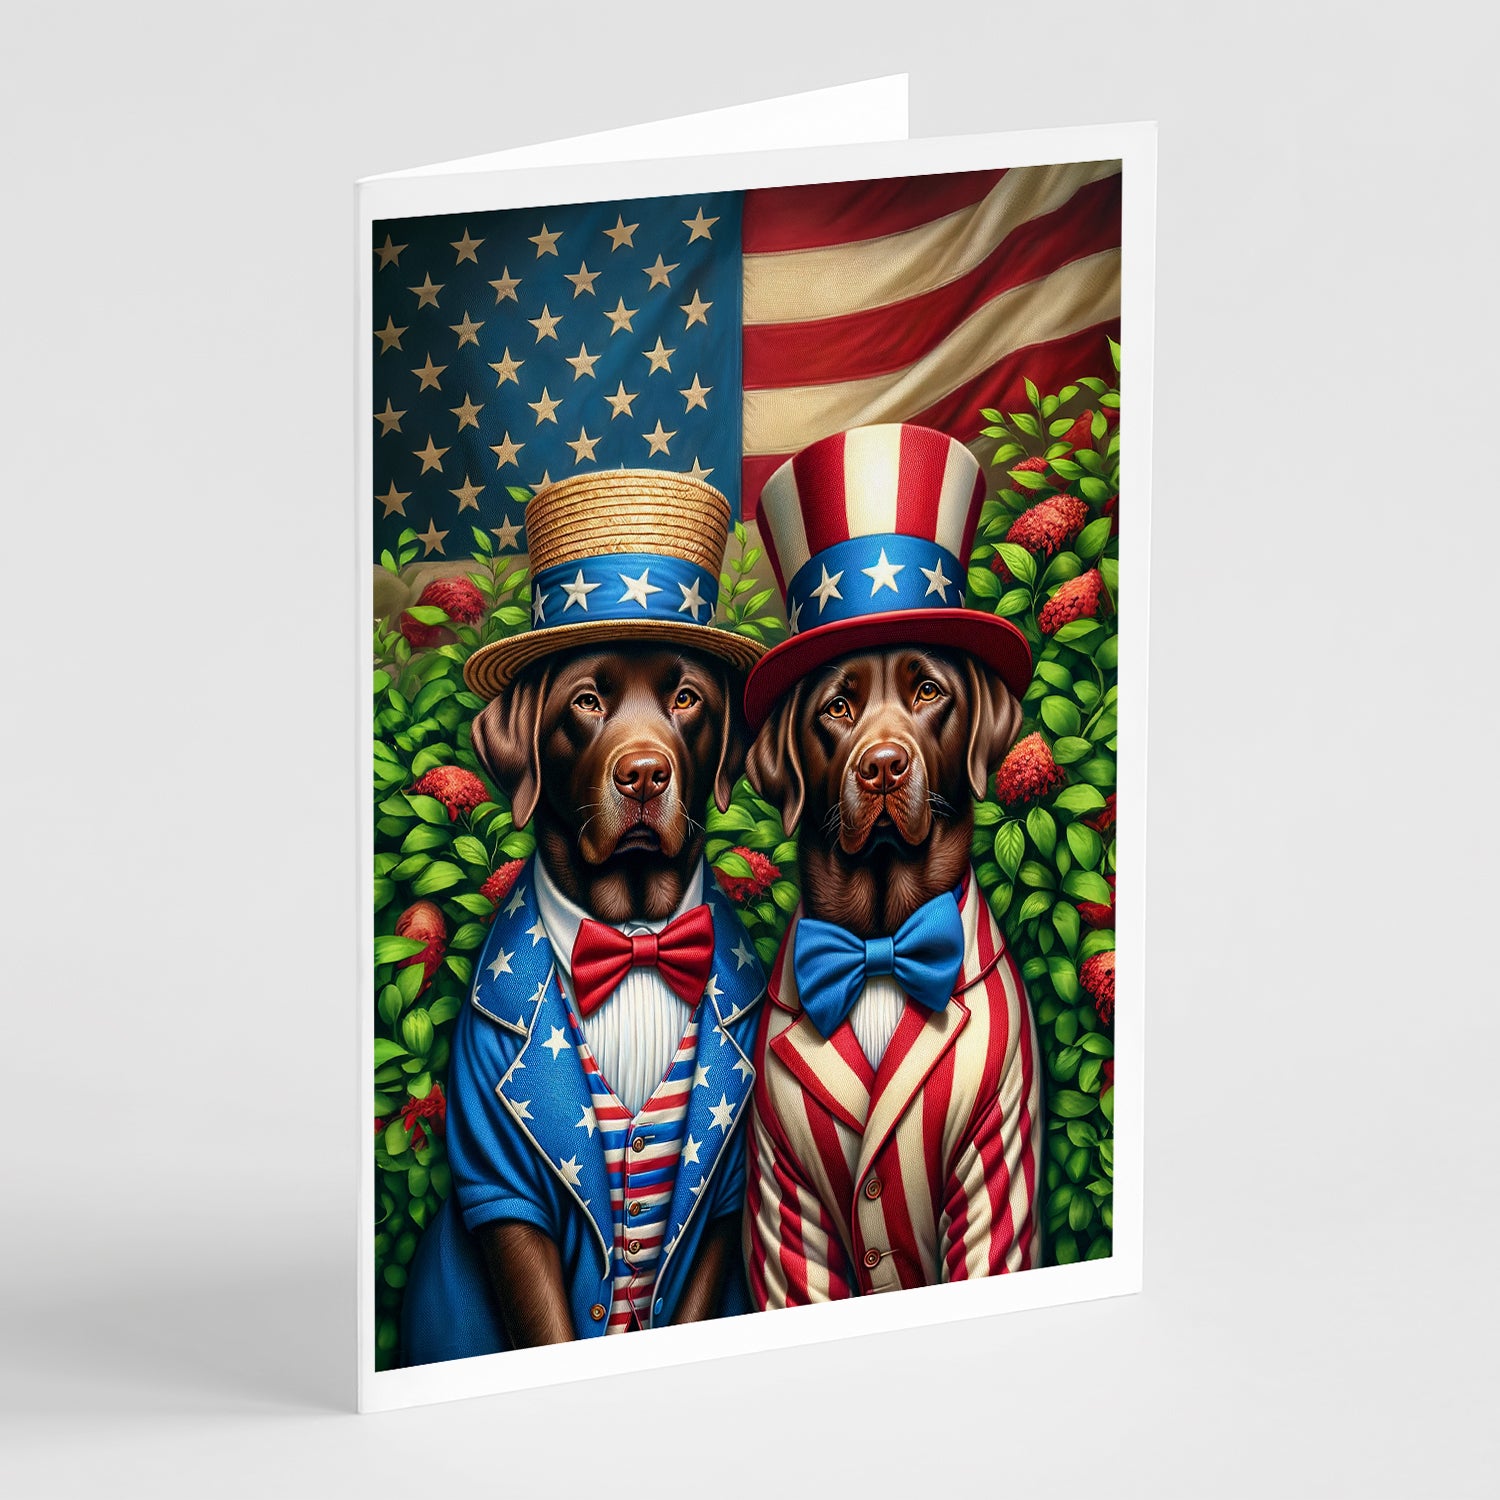 Buy this All American Labrador Retriever Greeting Cards Pack of 8